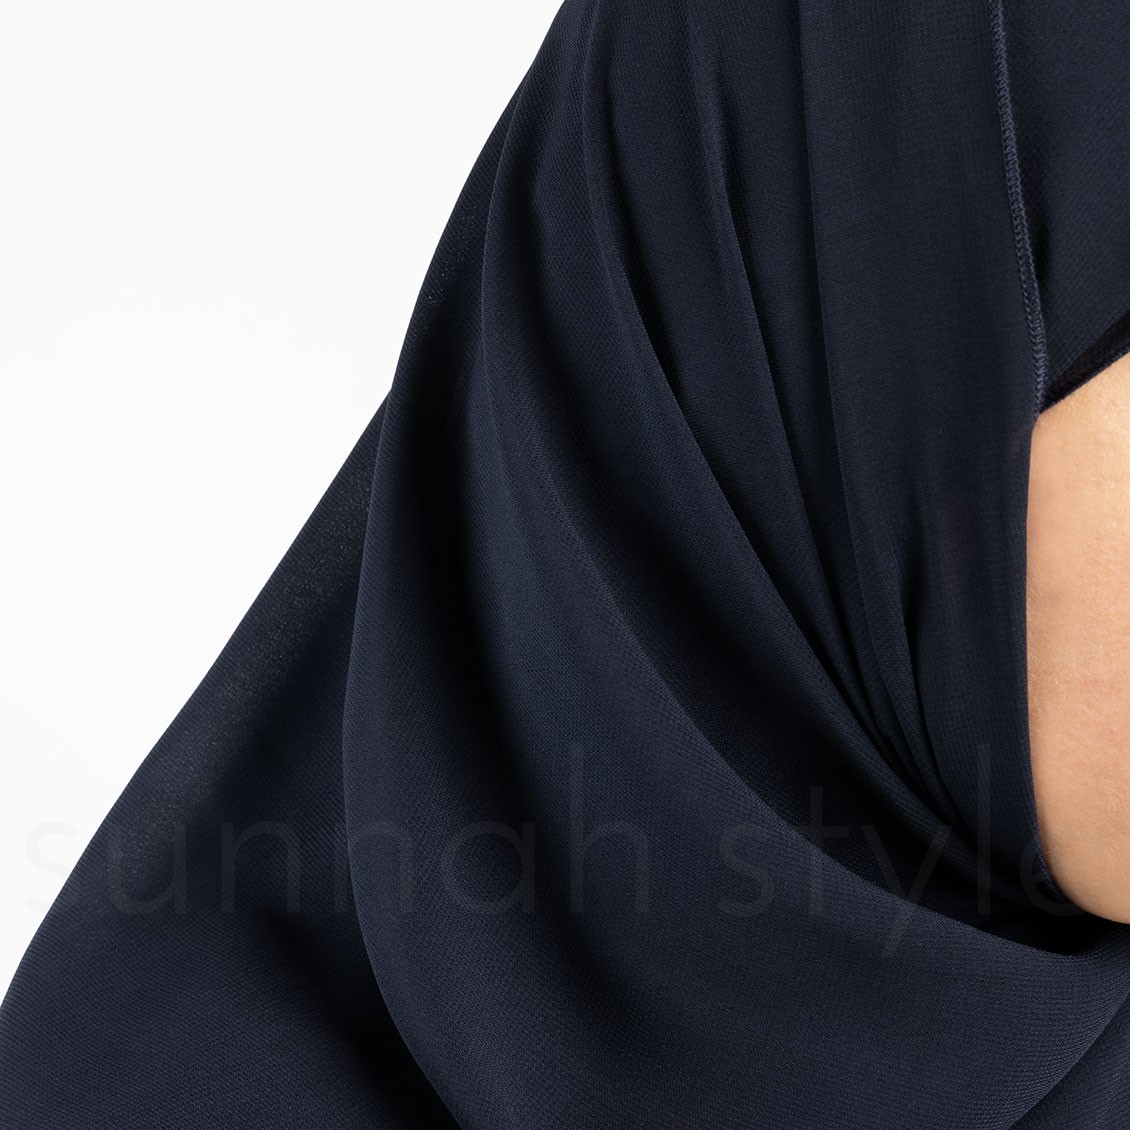 Sunnah Style Essentials Shayla - Large Navy Blue